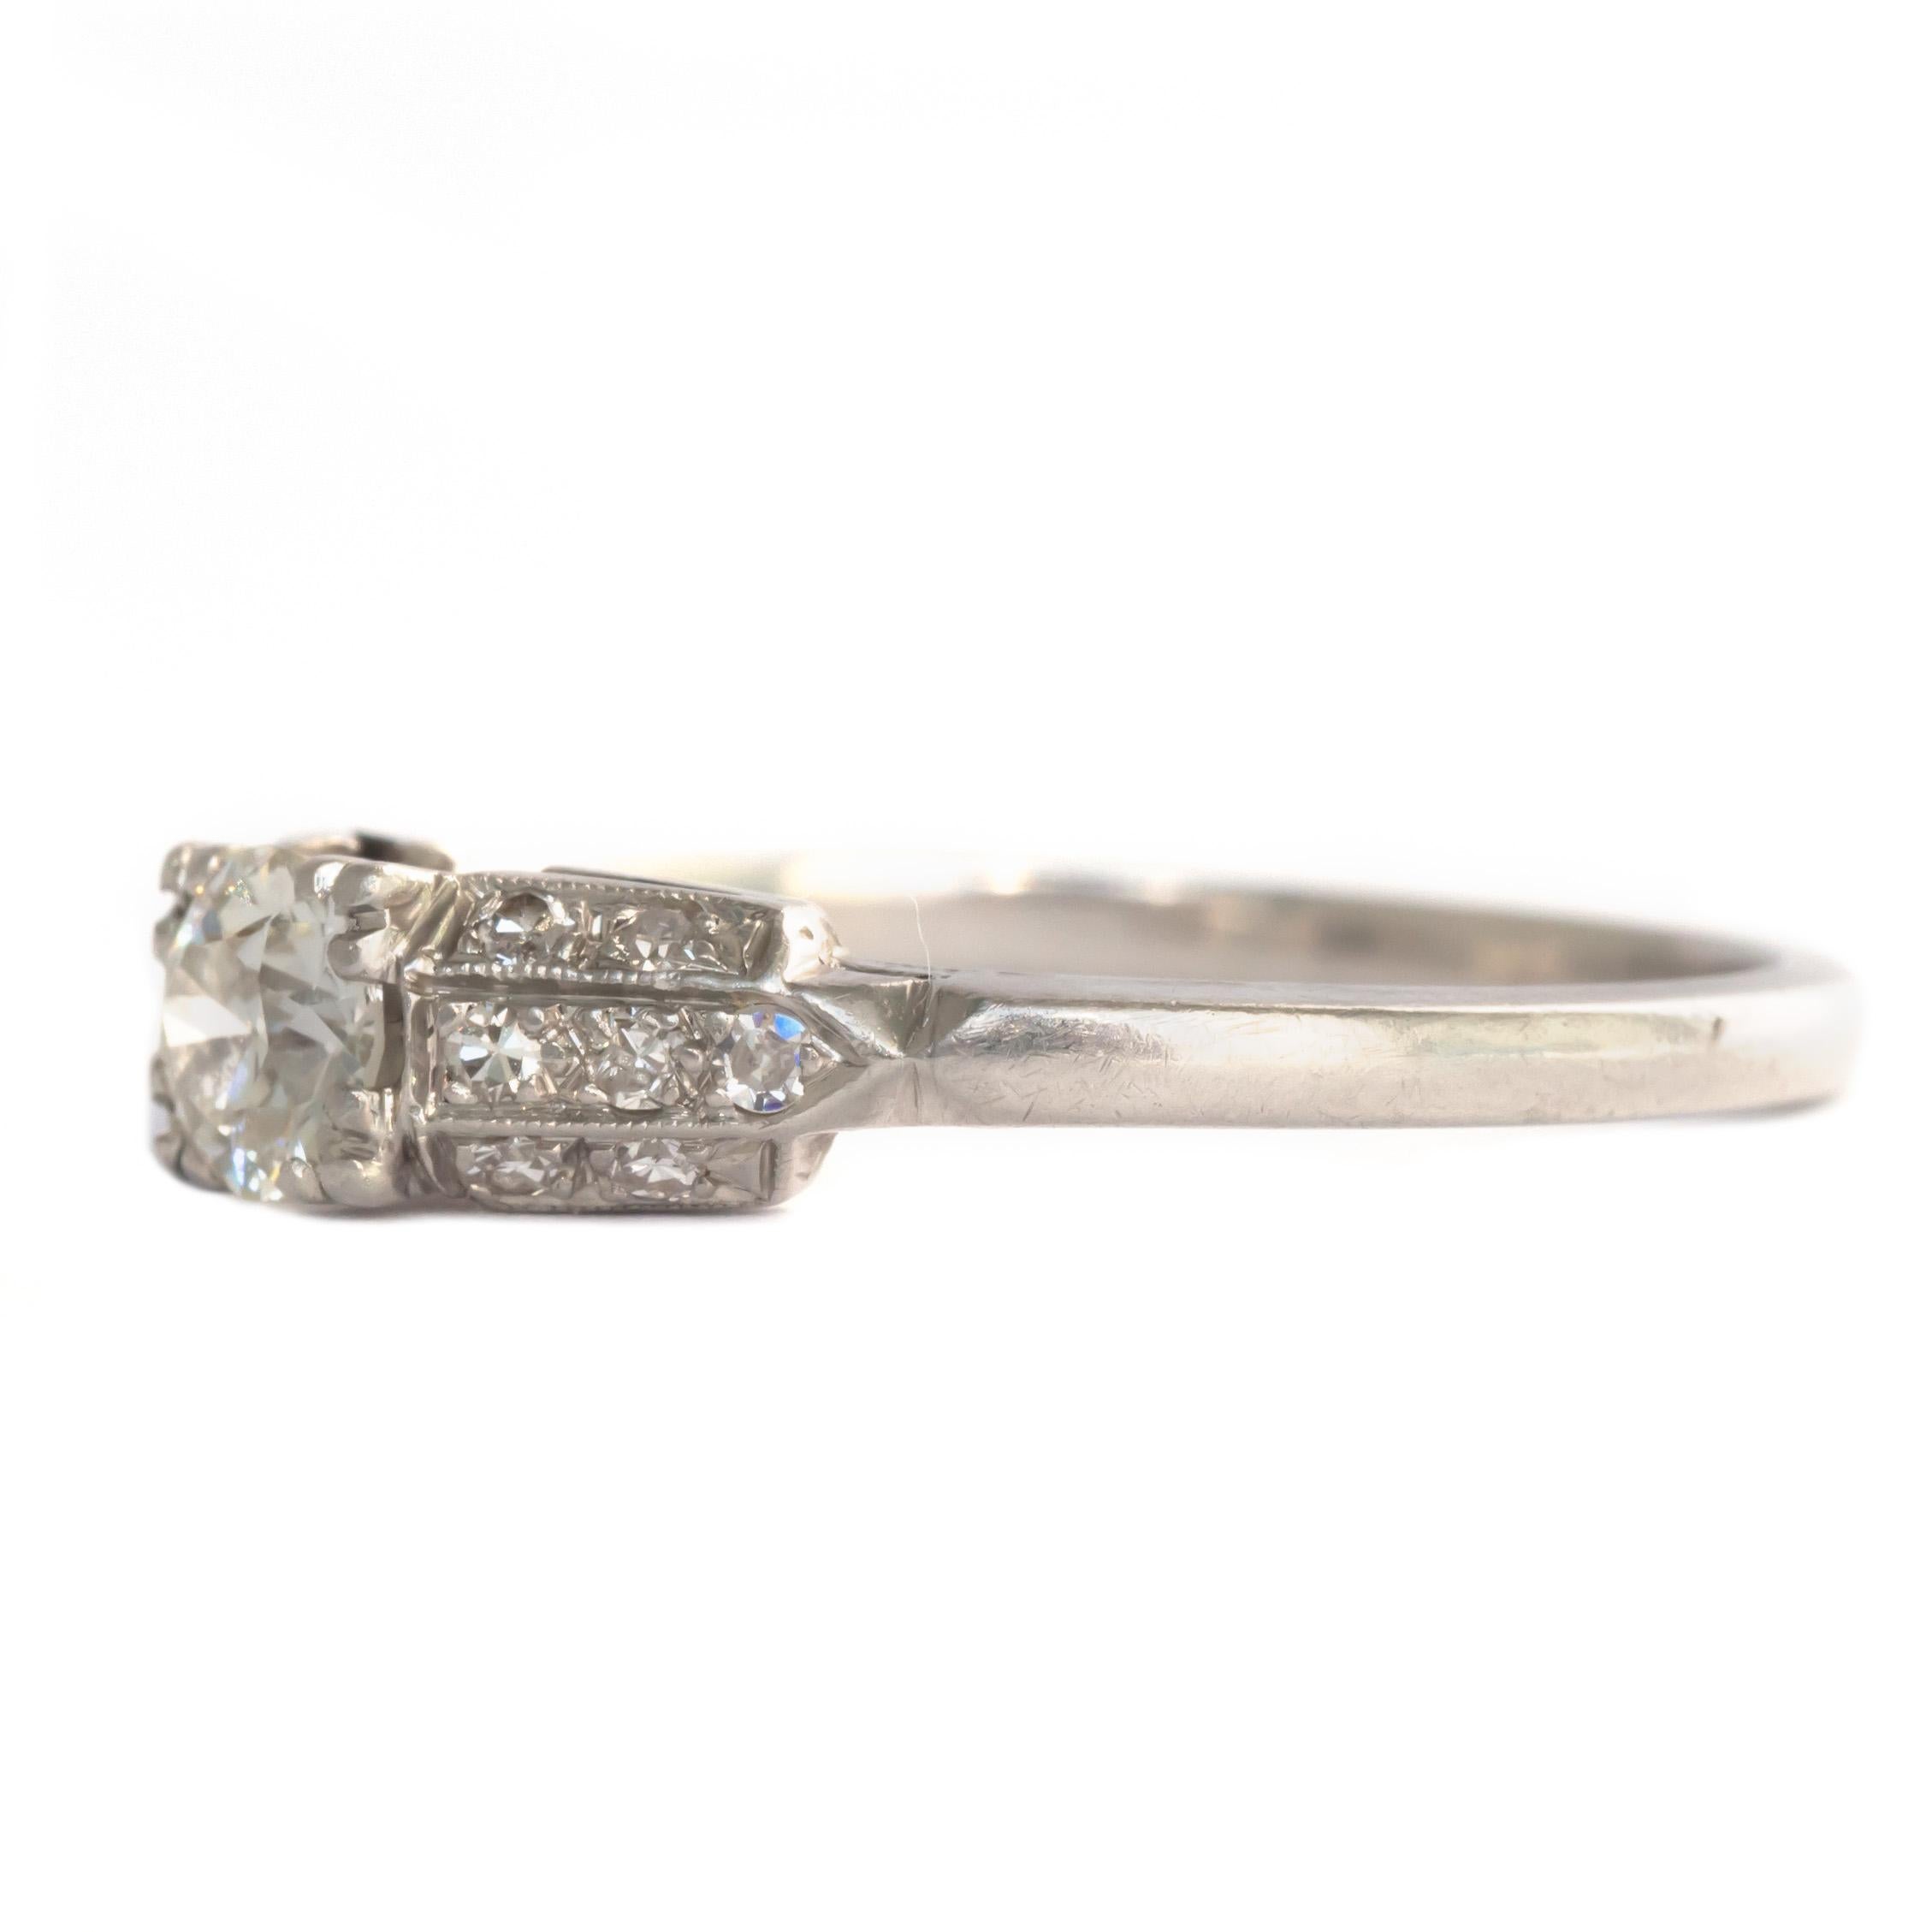 Ring Size: 8.95
Metal Type: Platinum 
Weight: 4.9 grams

Center Diamond Details
Shape: Old European Brilliant 
Carat Weight: .45 carat
Color: I
Clarity: SI1

Side Stone Details: 
Shape: antique Single Cut 
Total Carat Weight: .12 carat total